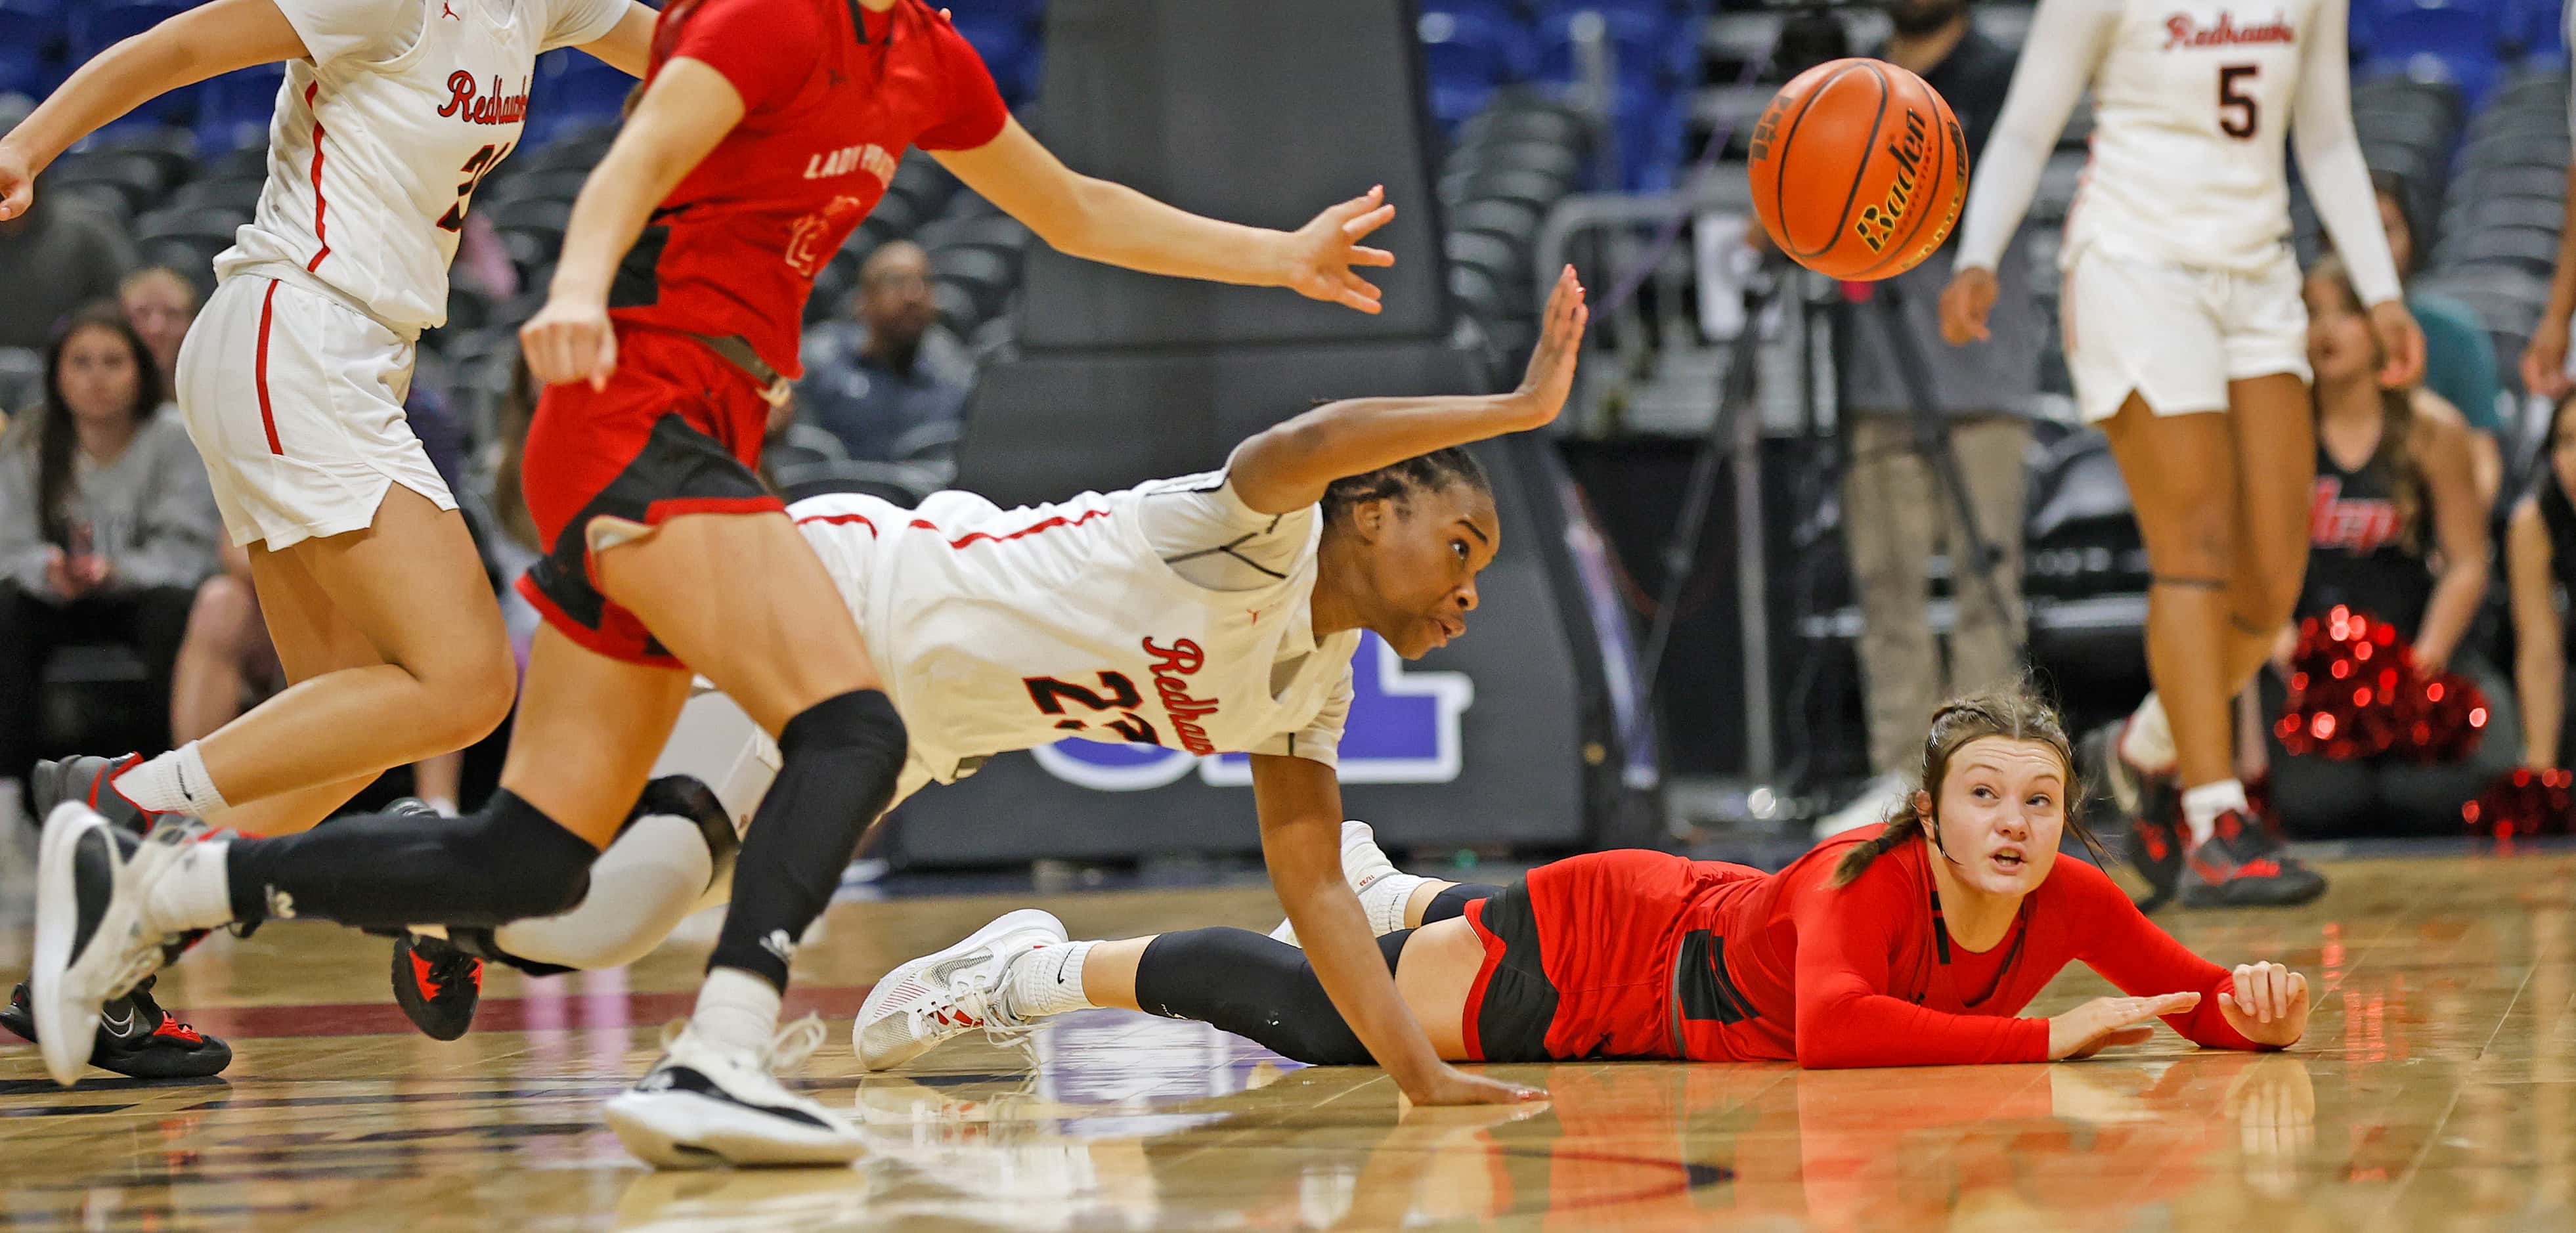 Frisco Liberty Journee Harris (23) dives for a loose ball as Frisco Liberty defeated Lubbock...